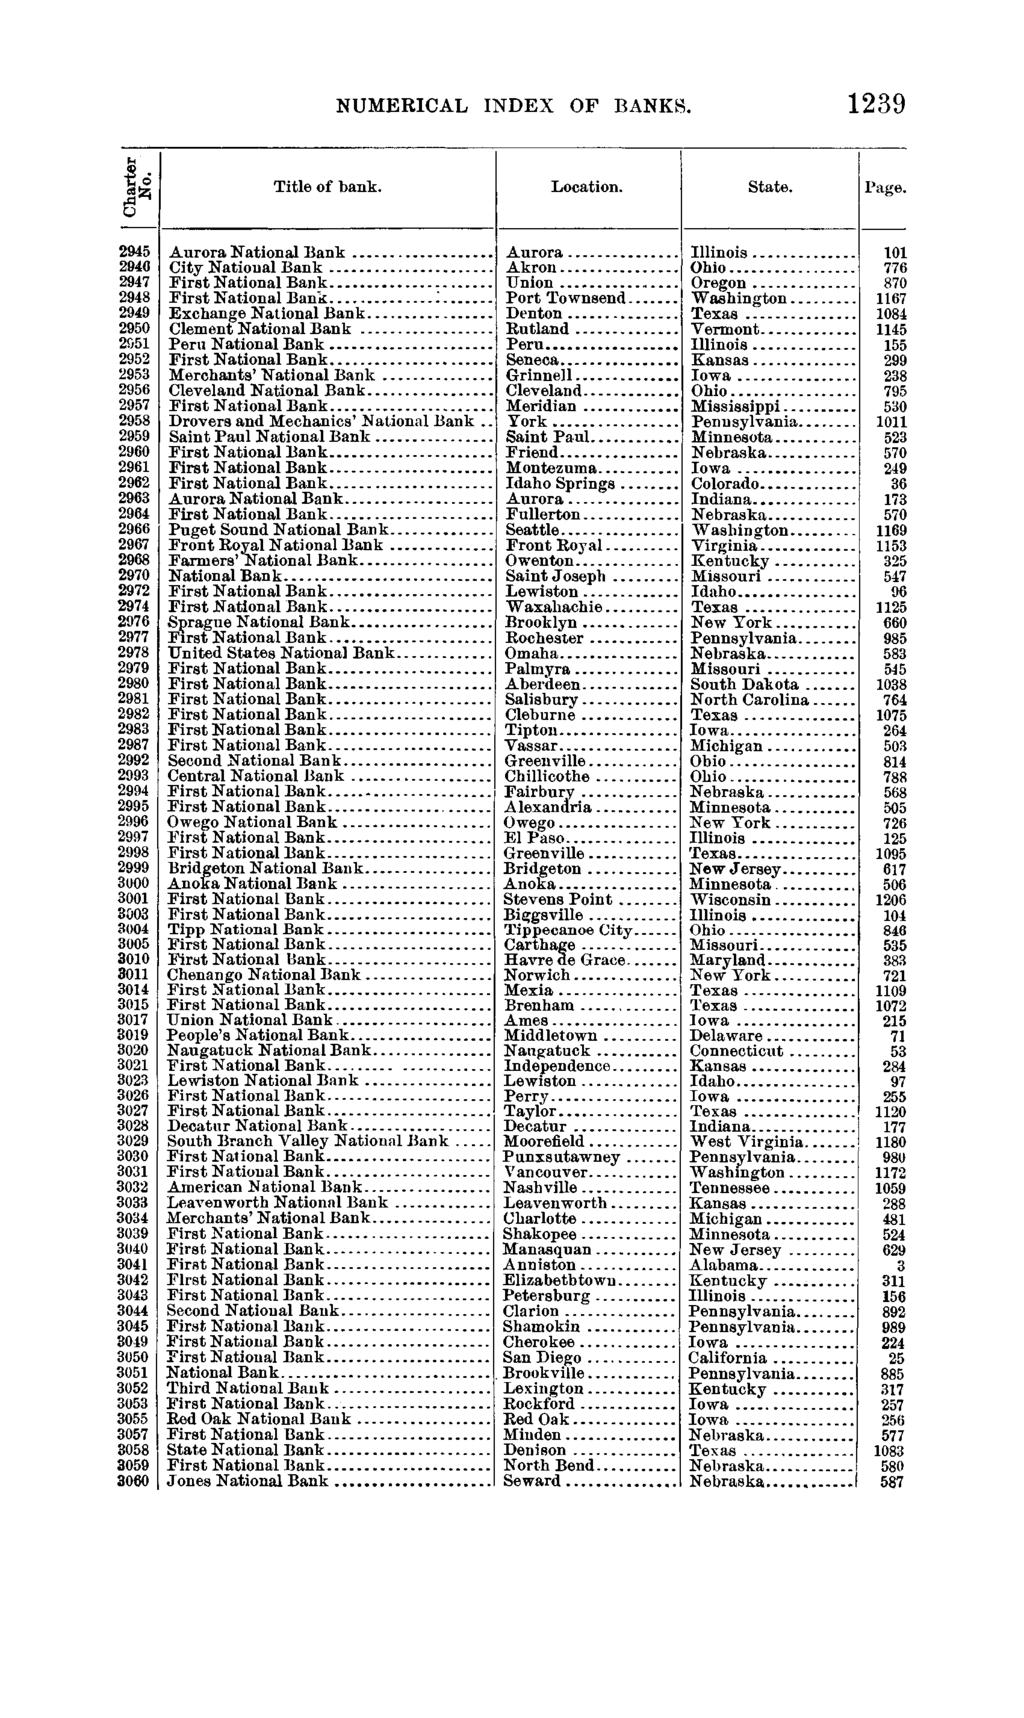 1898 NUMERICAL INDEX OF BANKS.